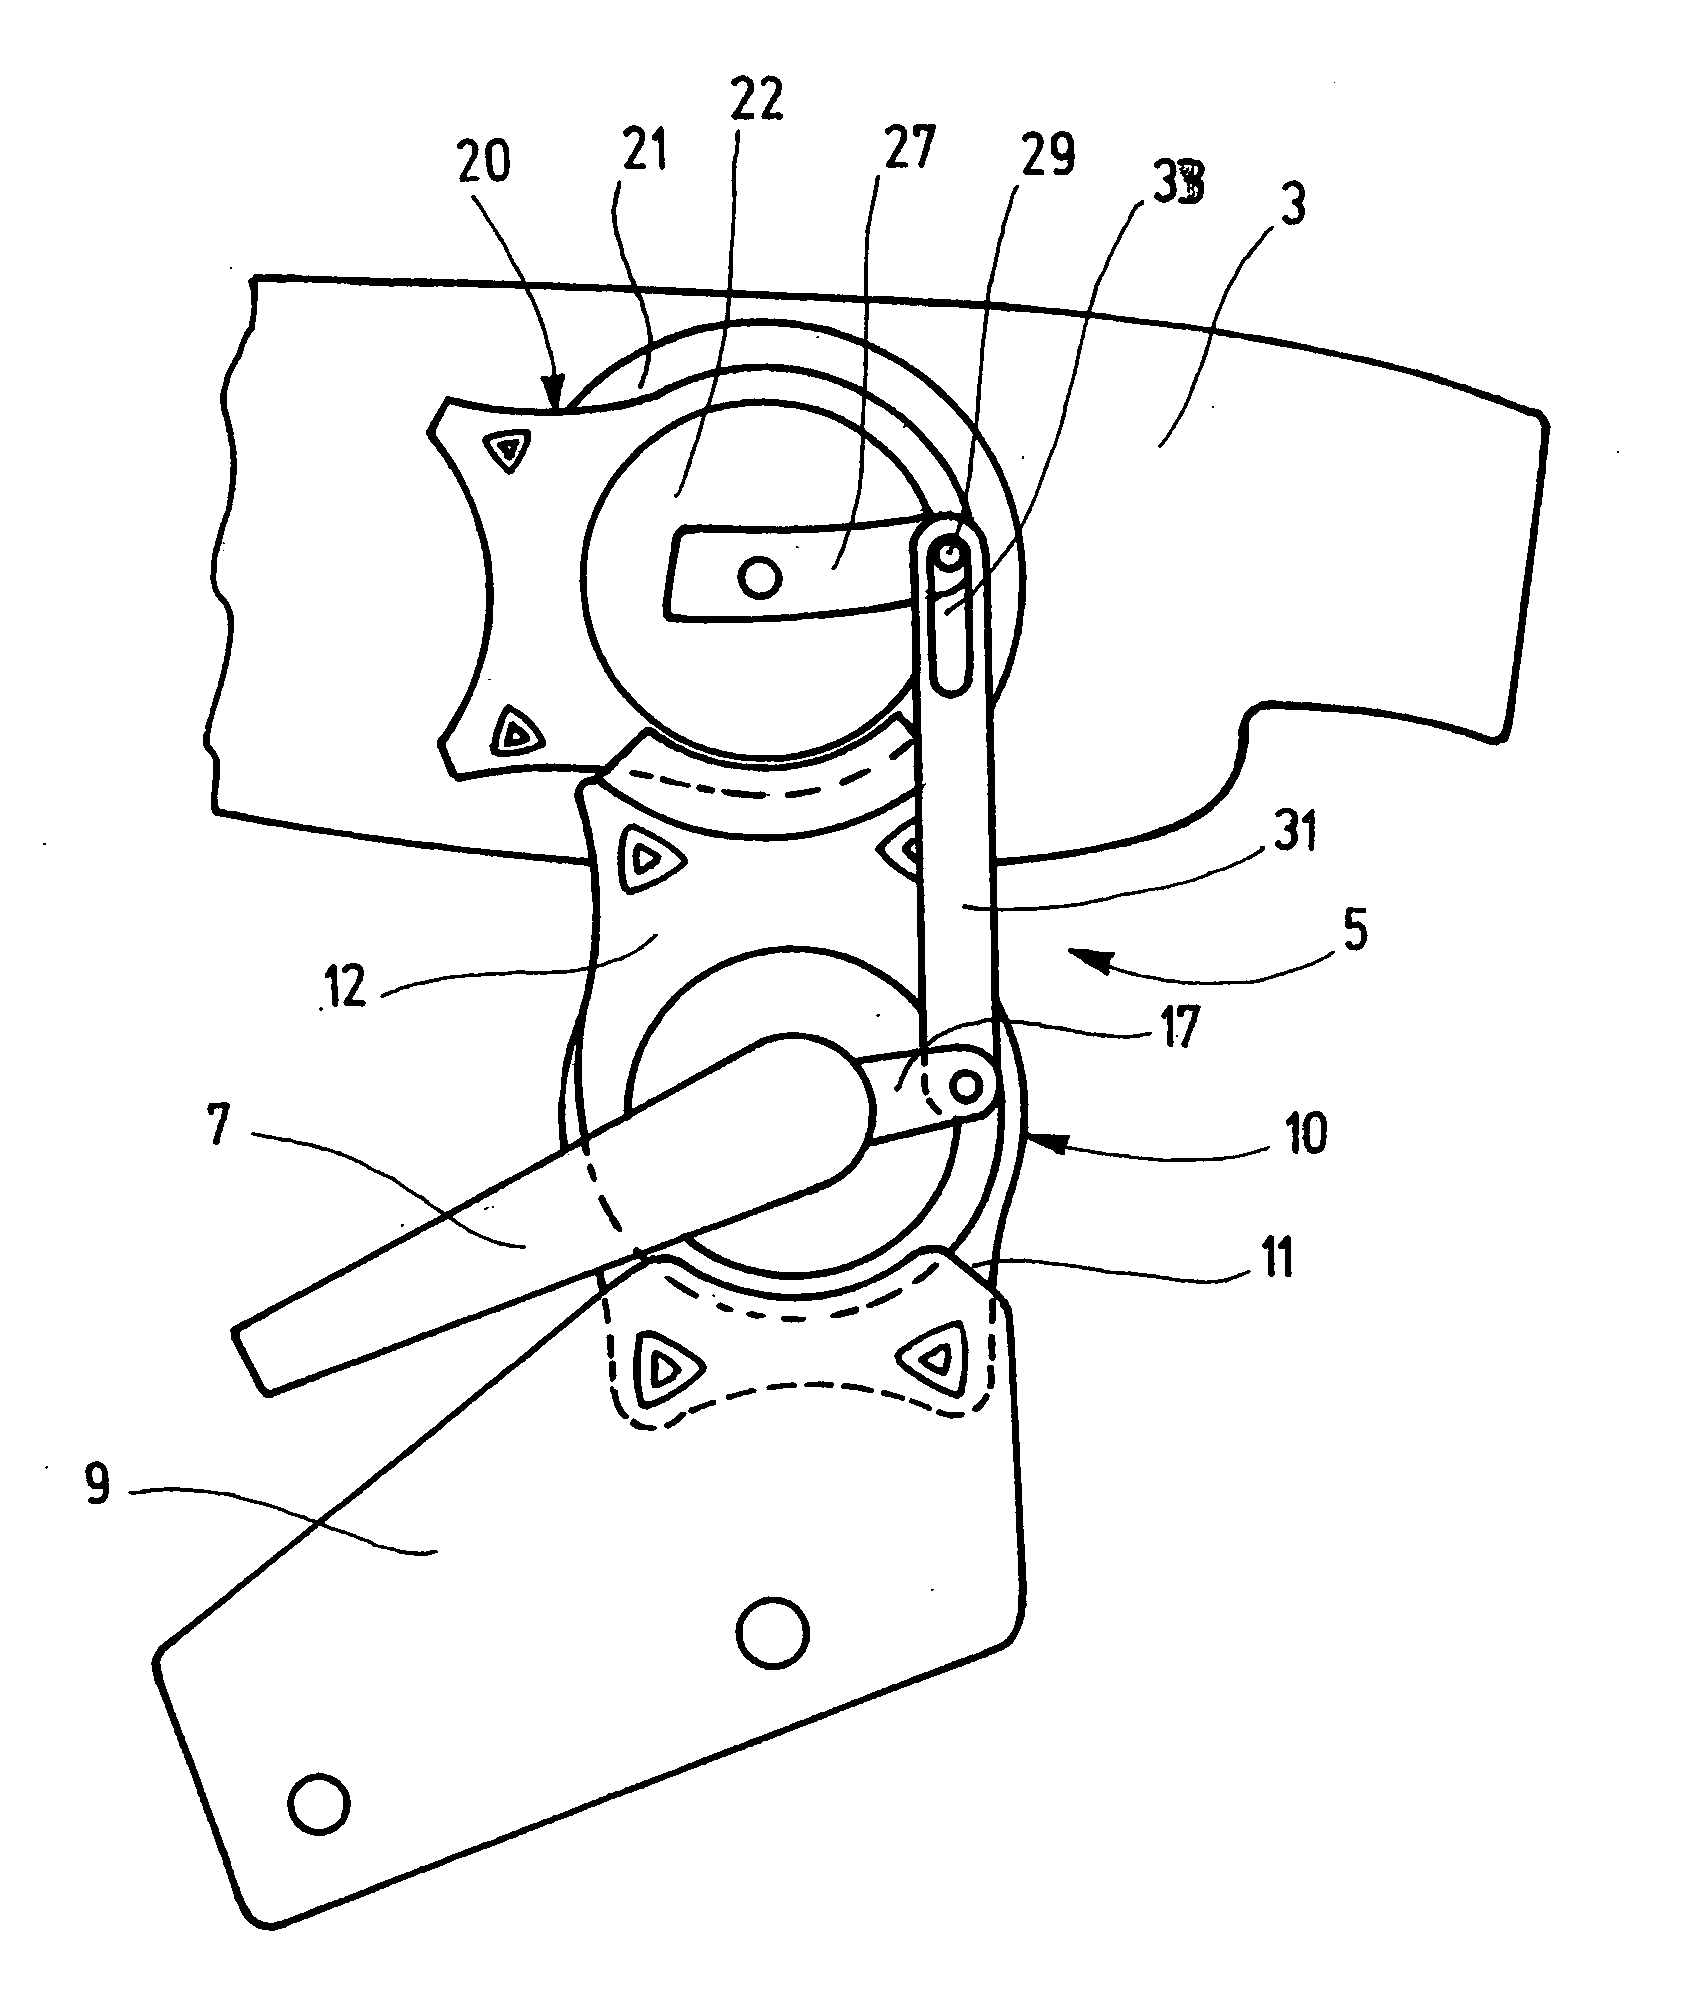 Fitting system for a vehicle seat